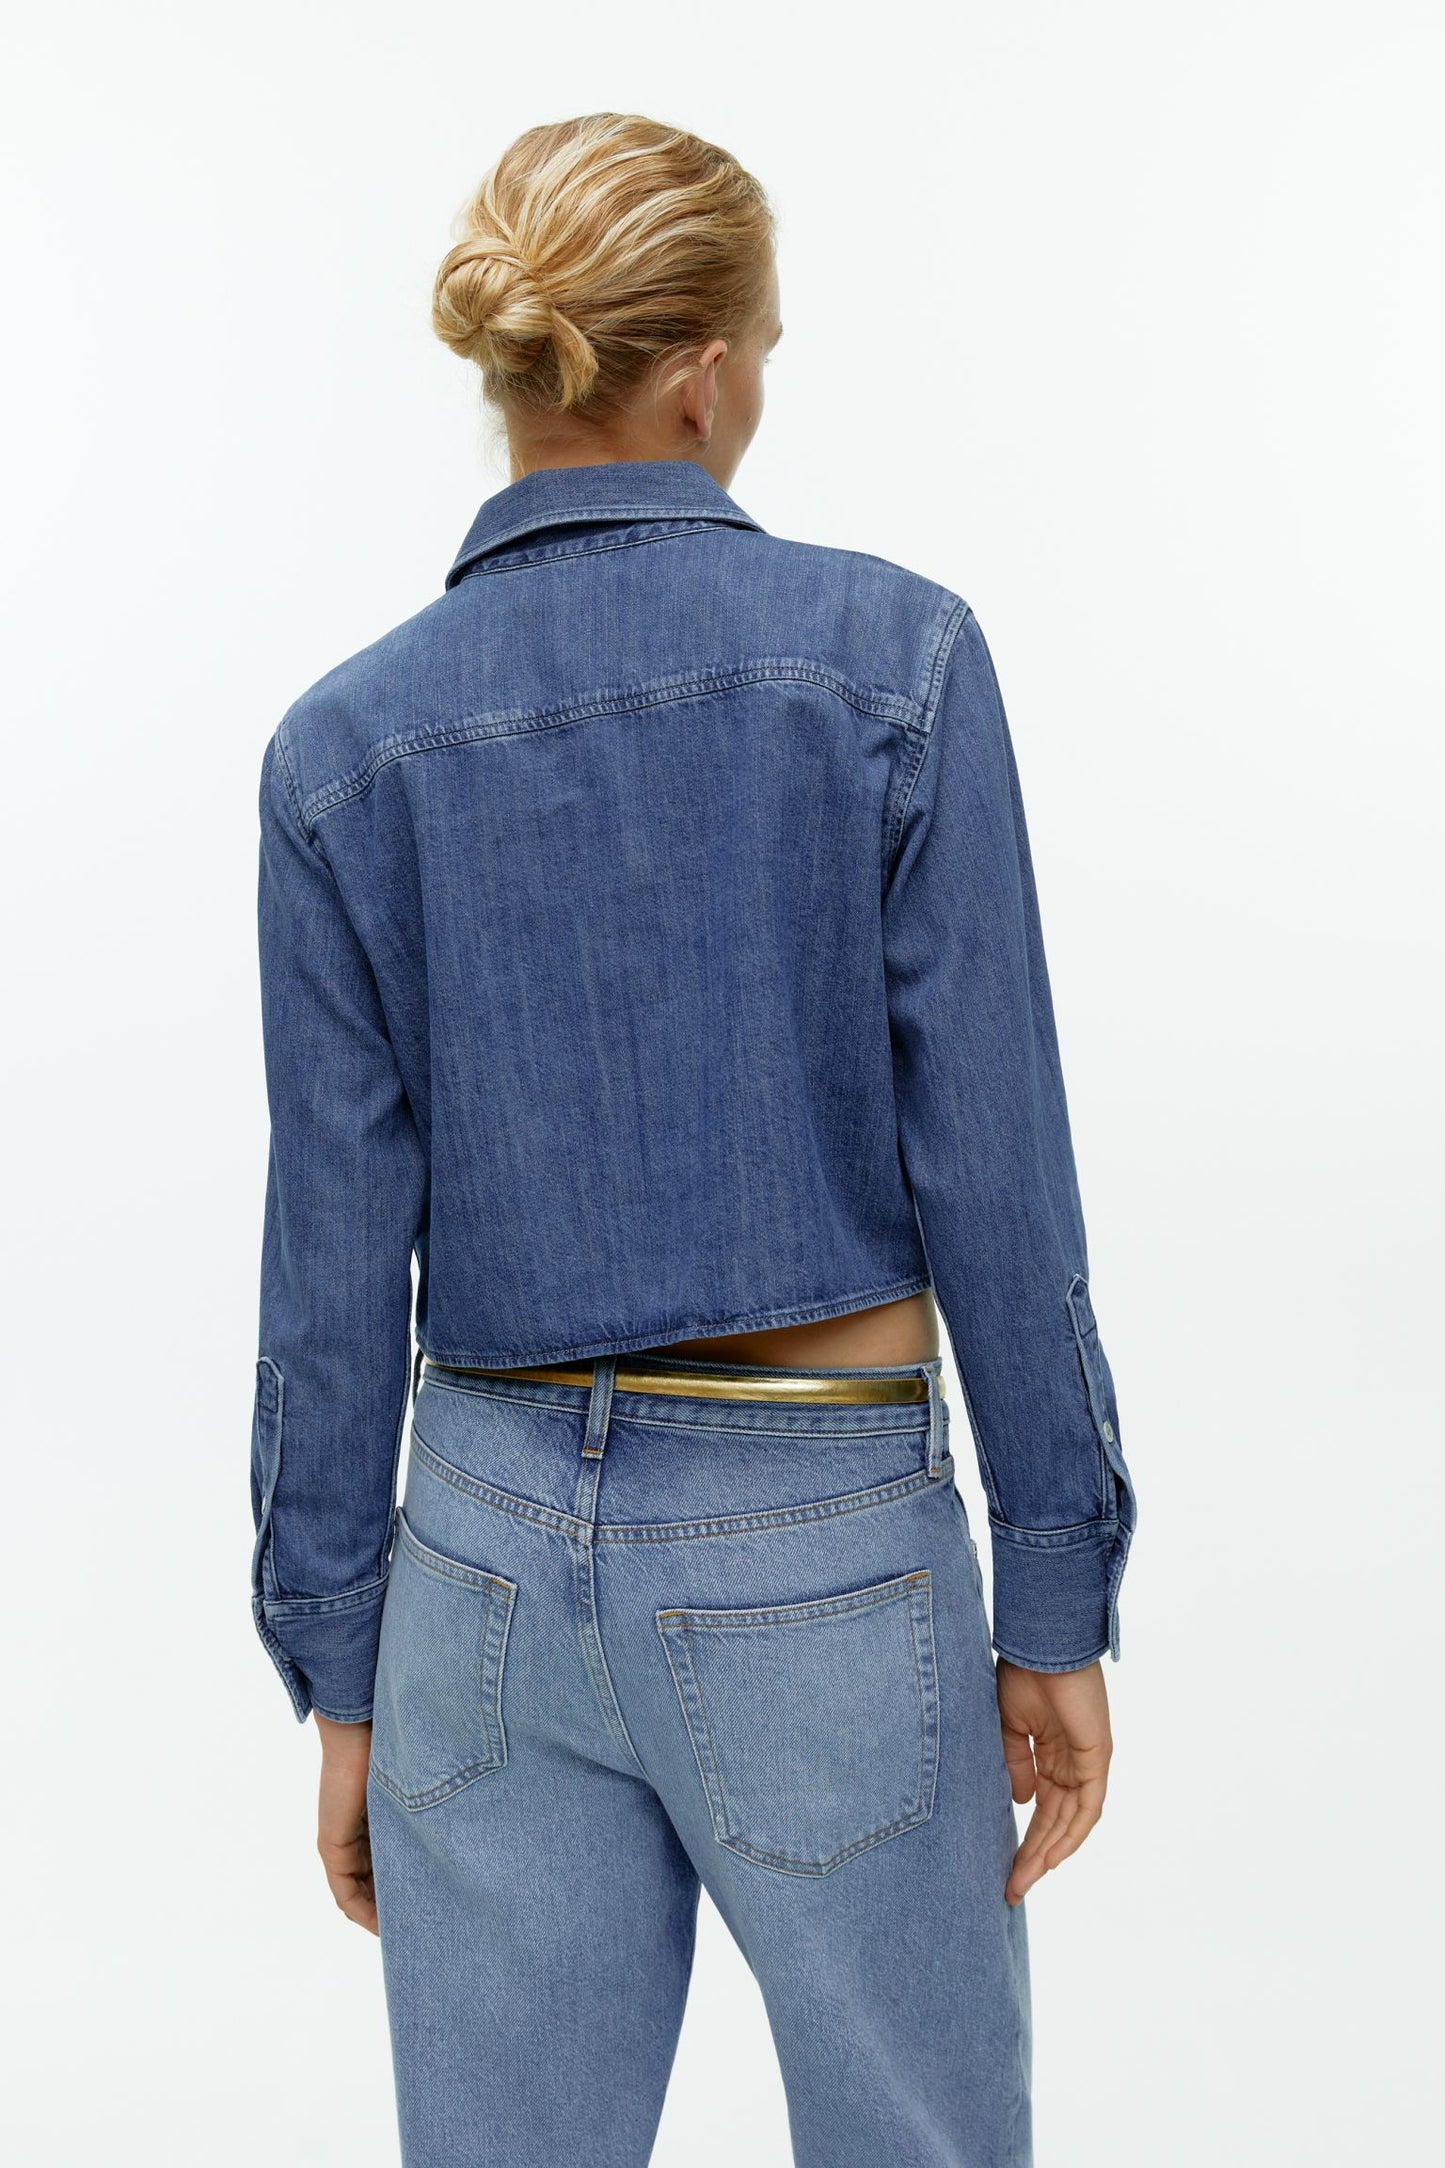 New Women Cropped Styled Denim Shirt Made From Organic Cotton